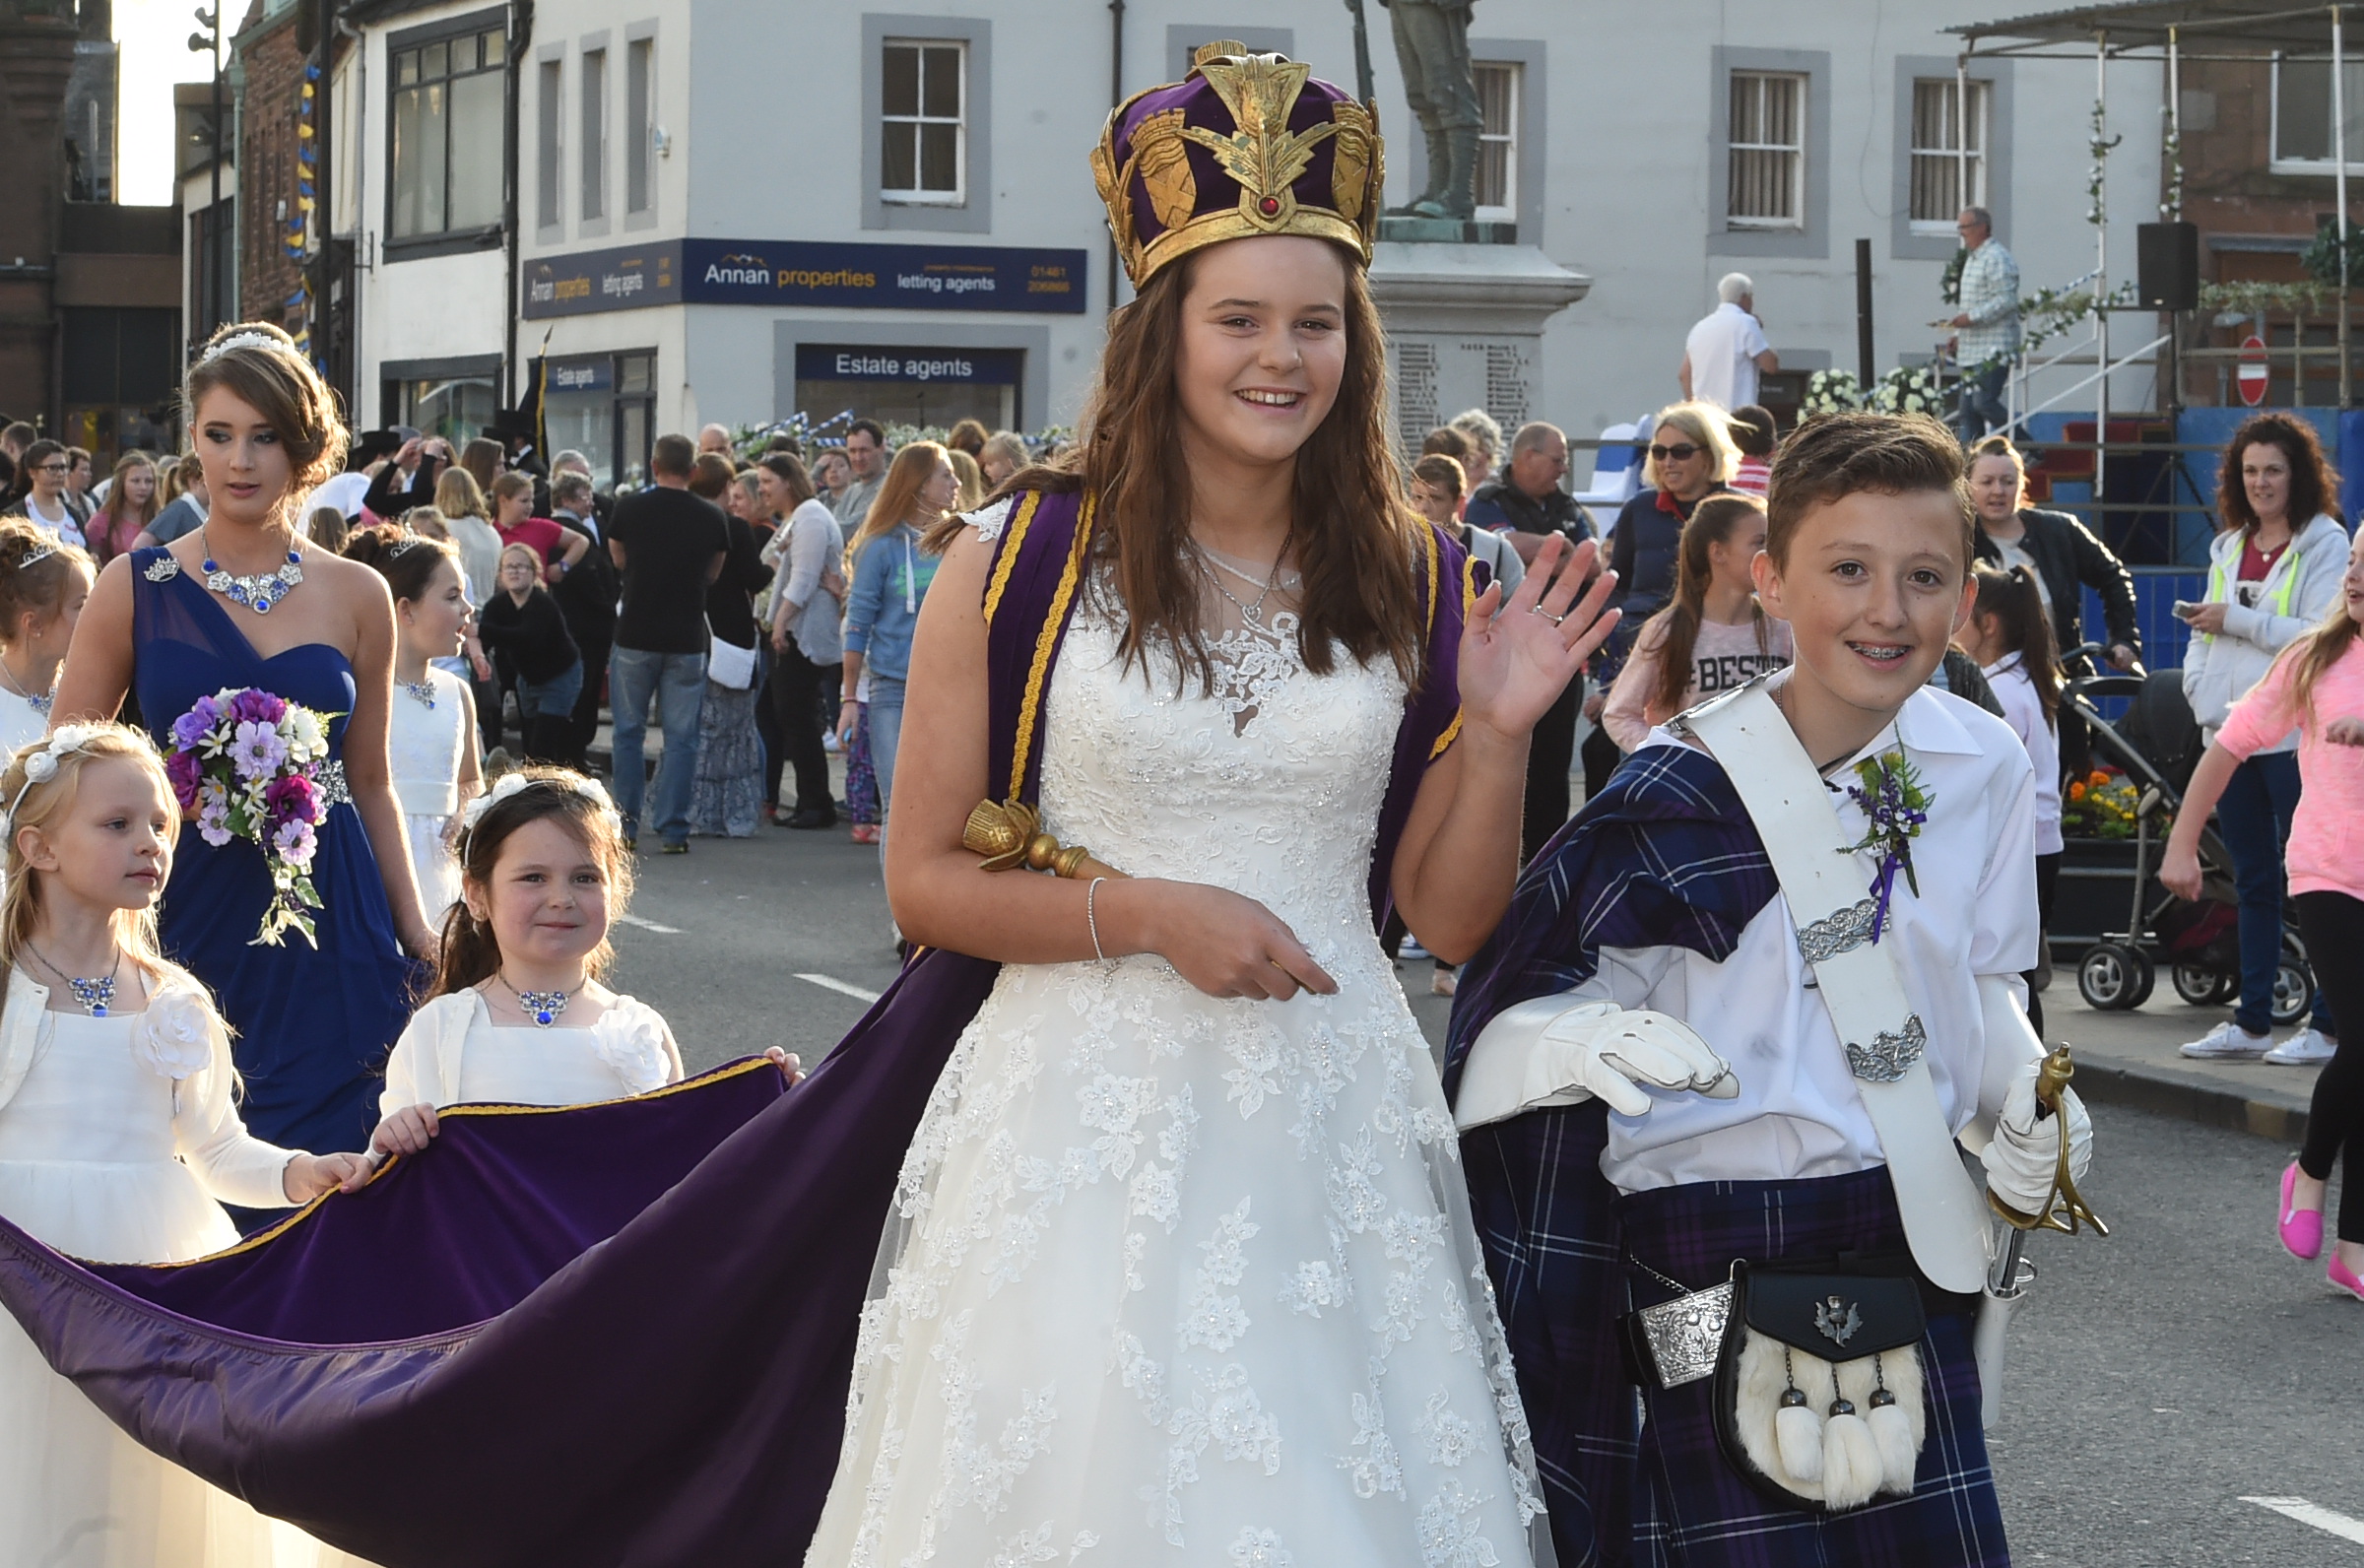 Annan's Queen of the Border crowned